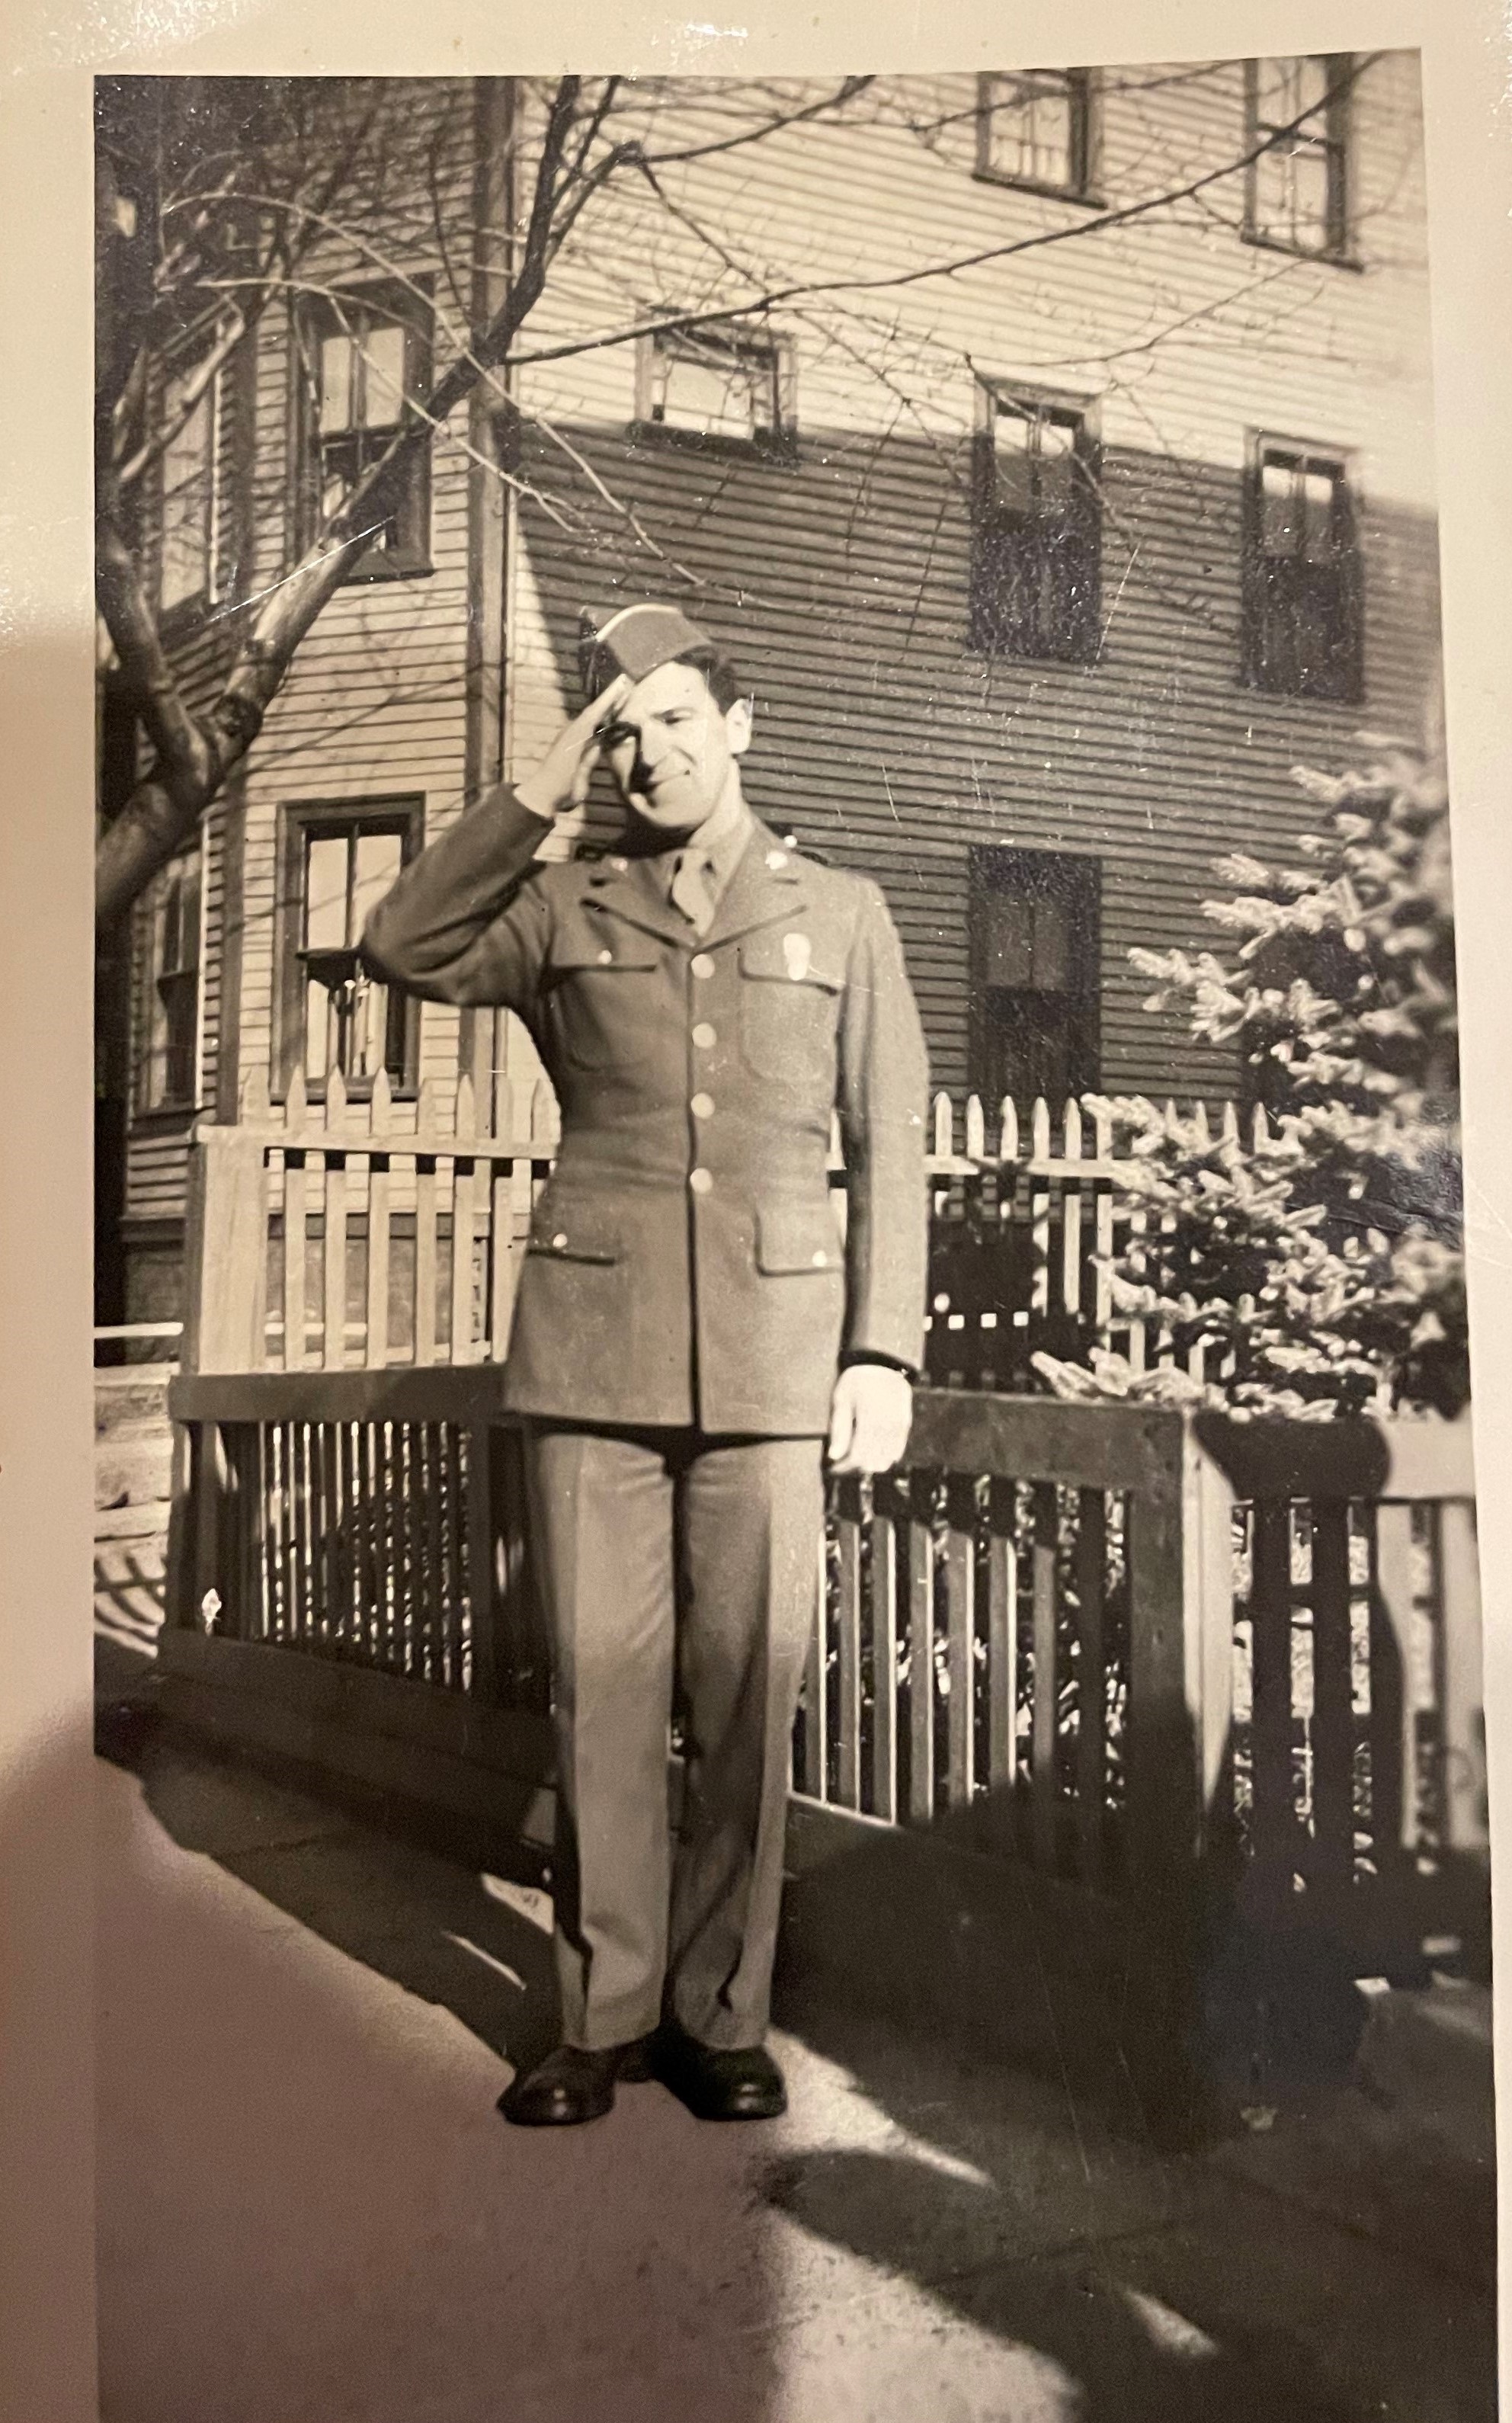 My grandfather on leave before going overseas